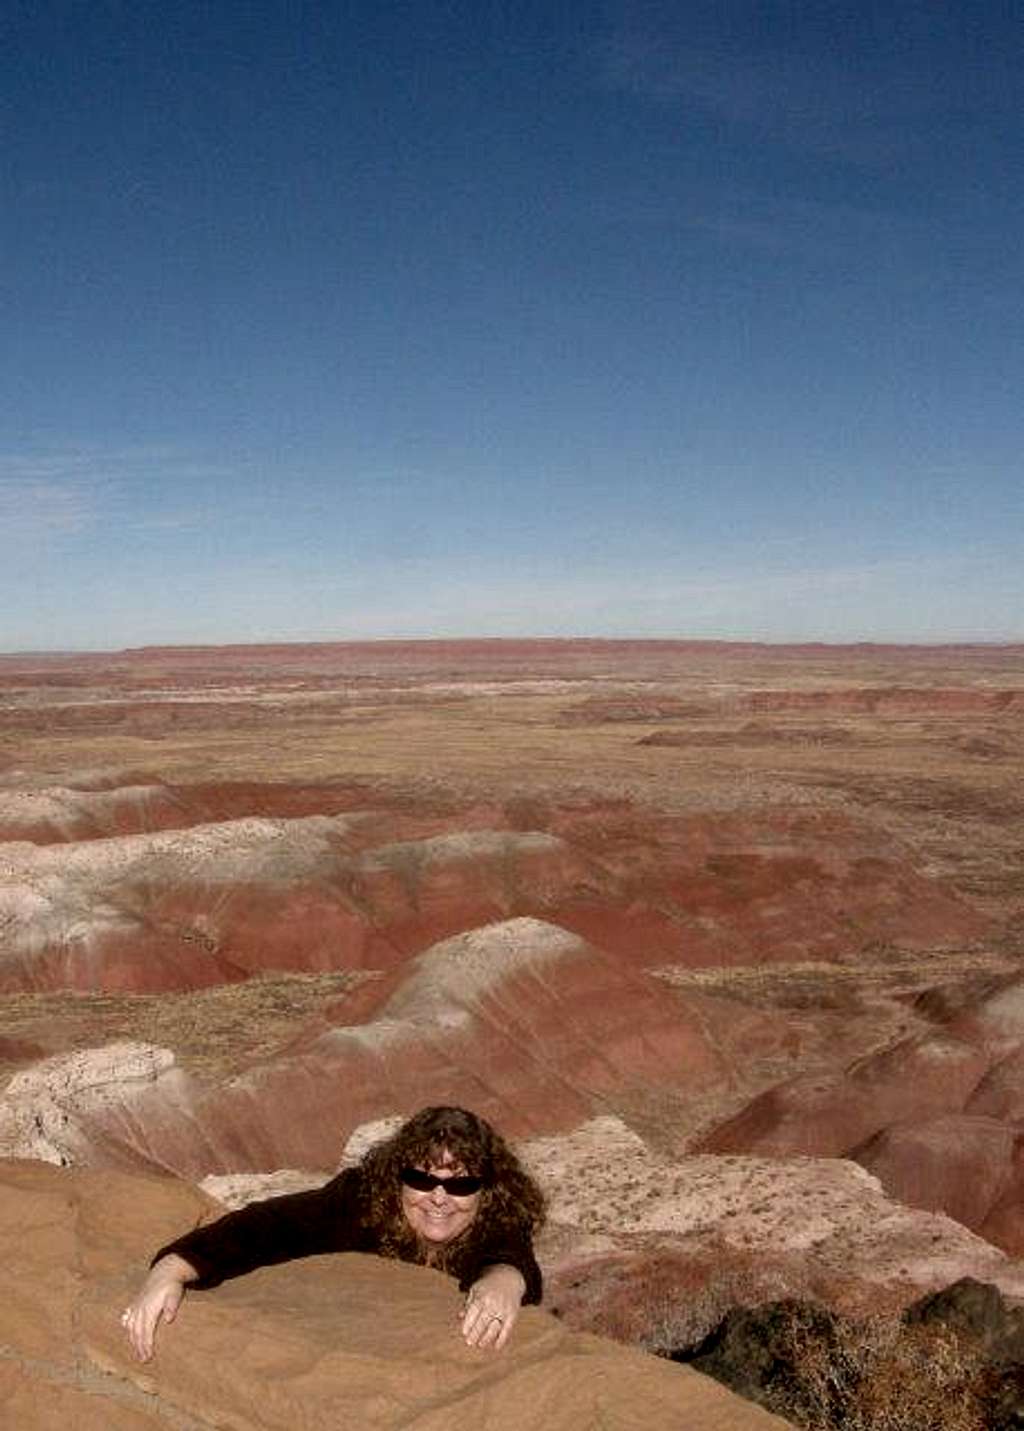 Falling into the Painted Desert